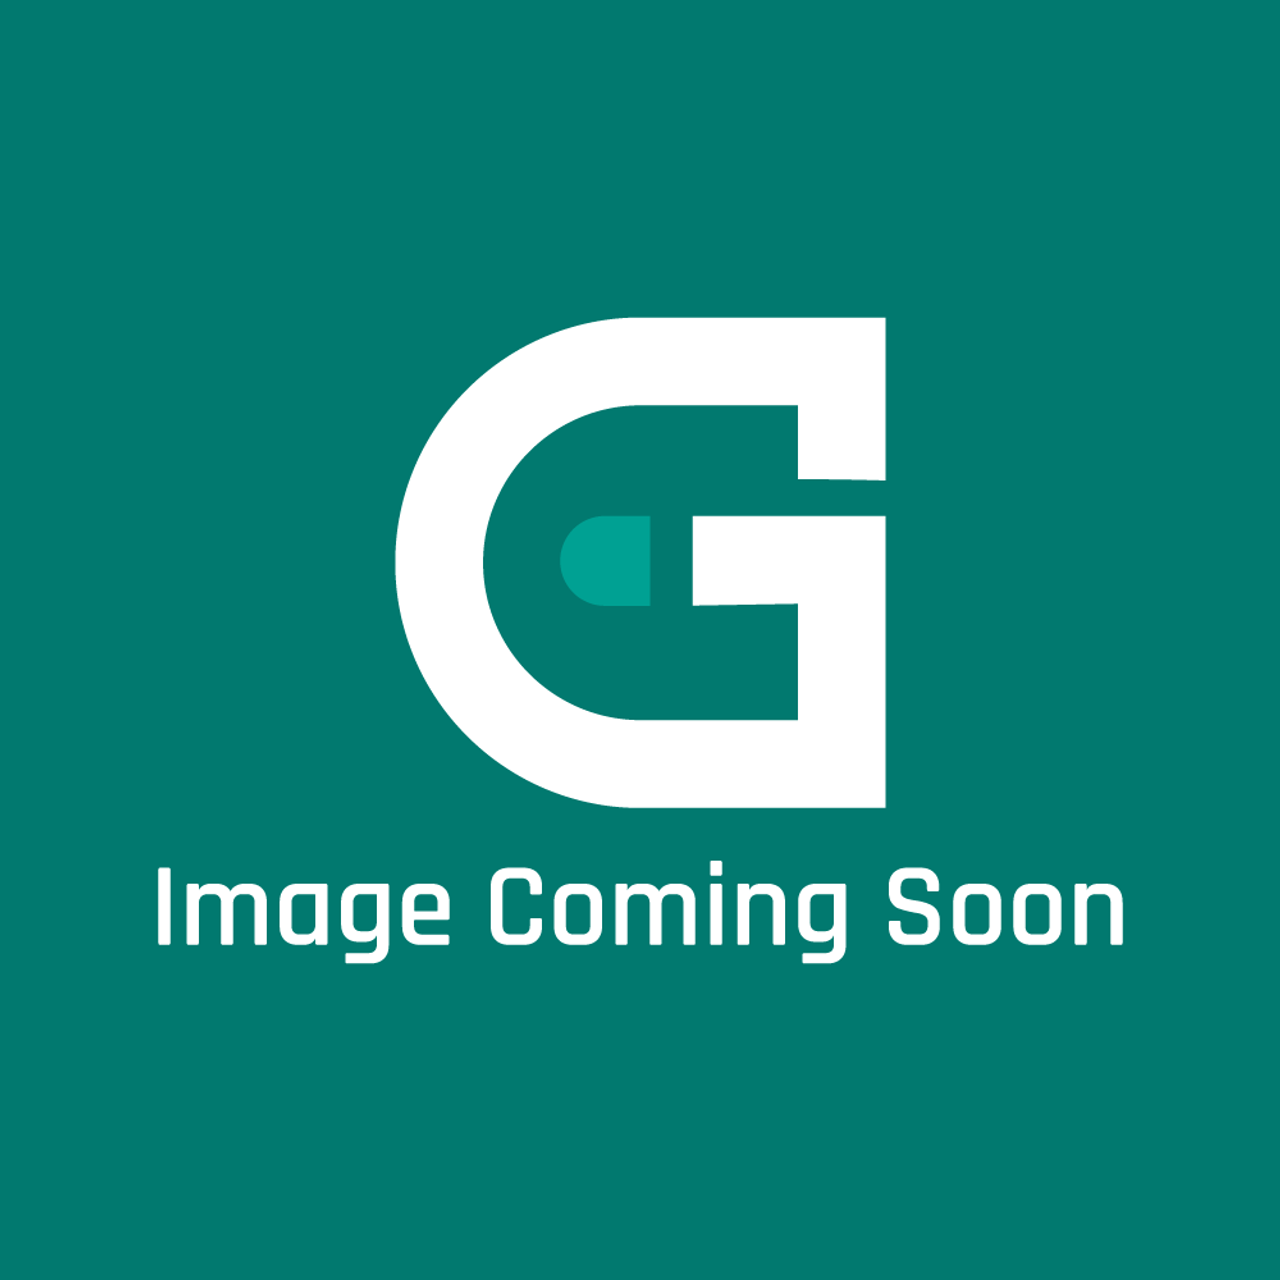 Frigidaire - Electrolux 316560149 Controller - Image Coming Soon!